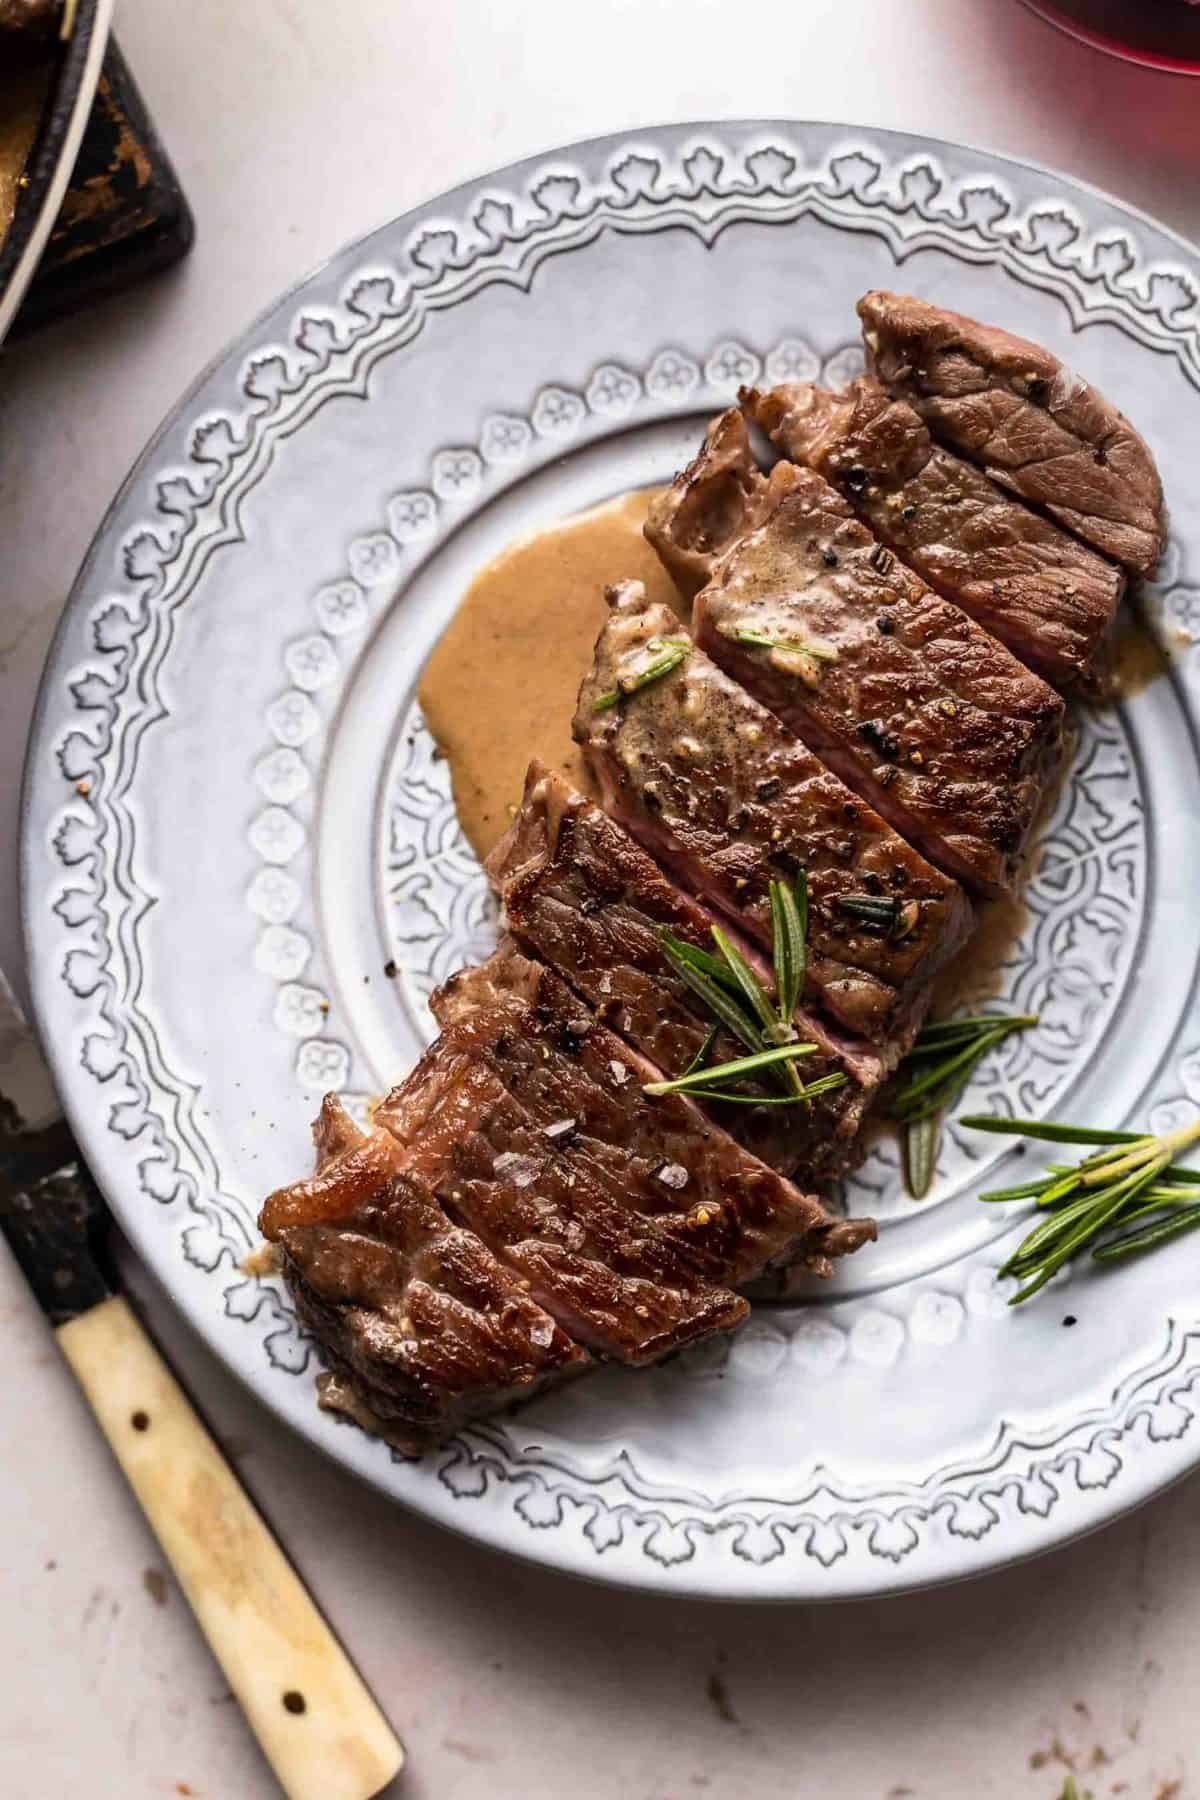 Plate of steak with rosemary and cream sauce.